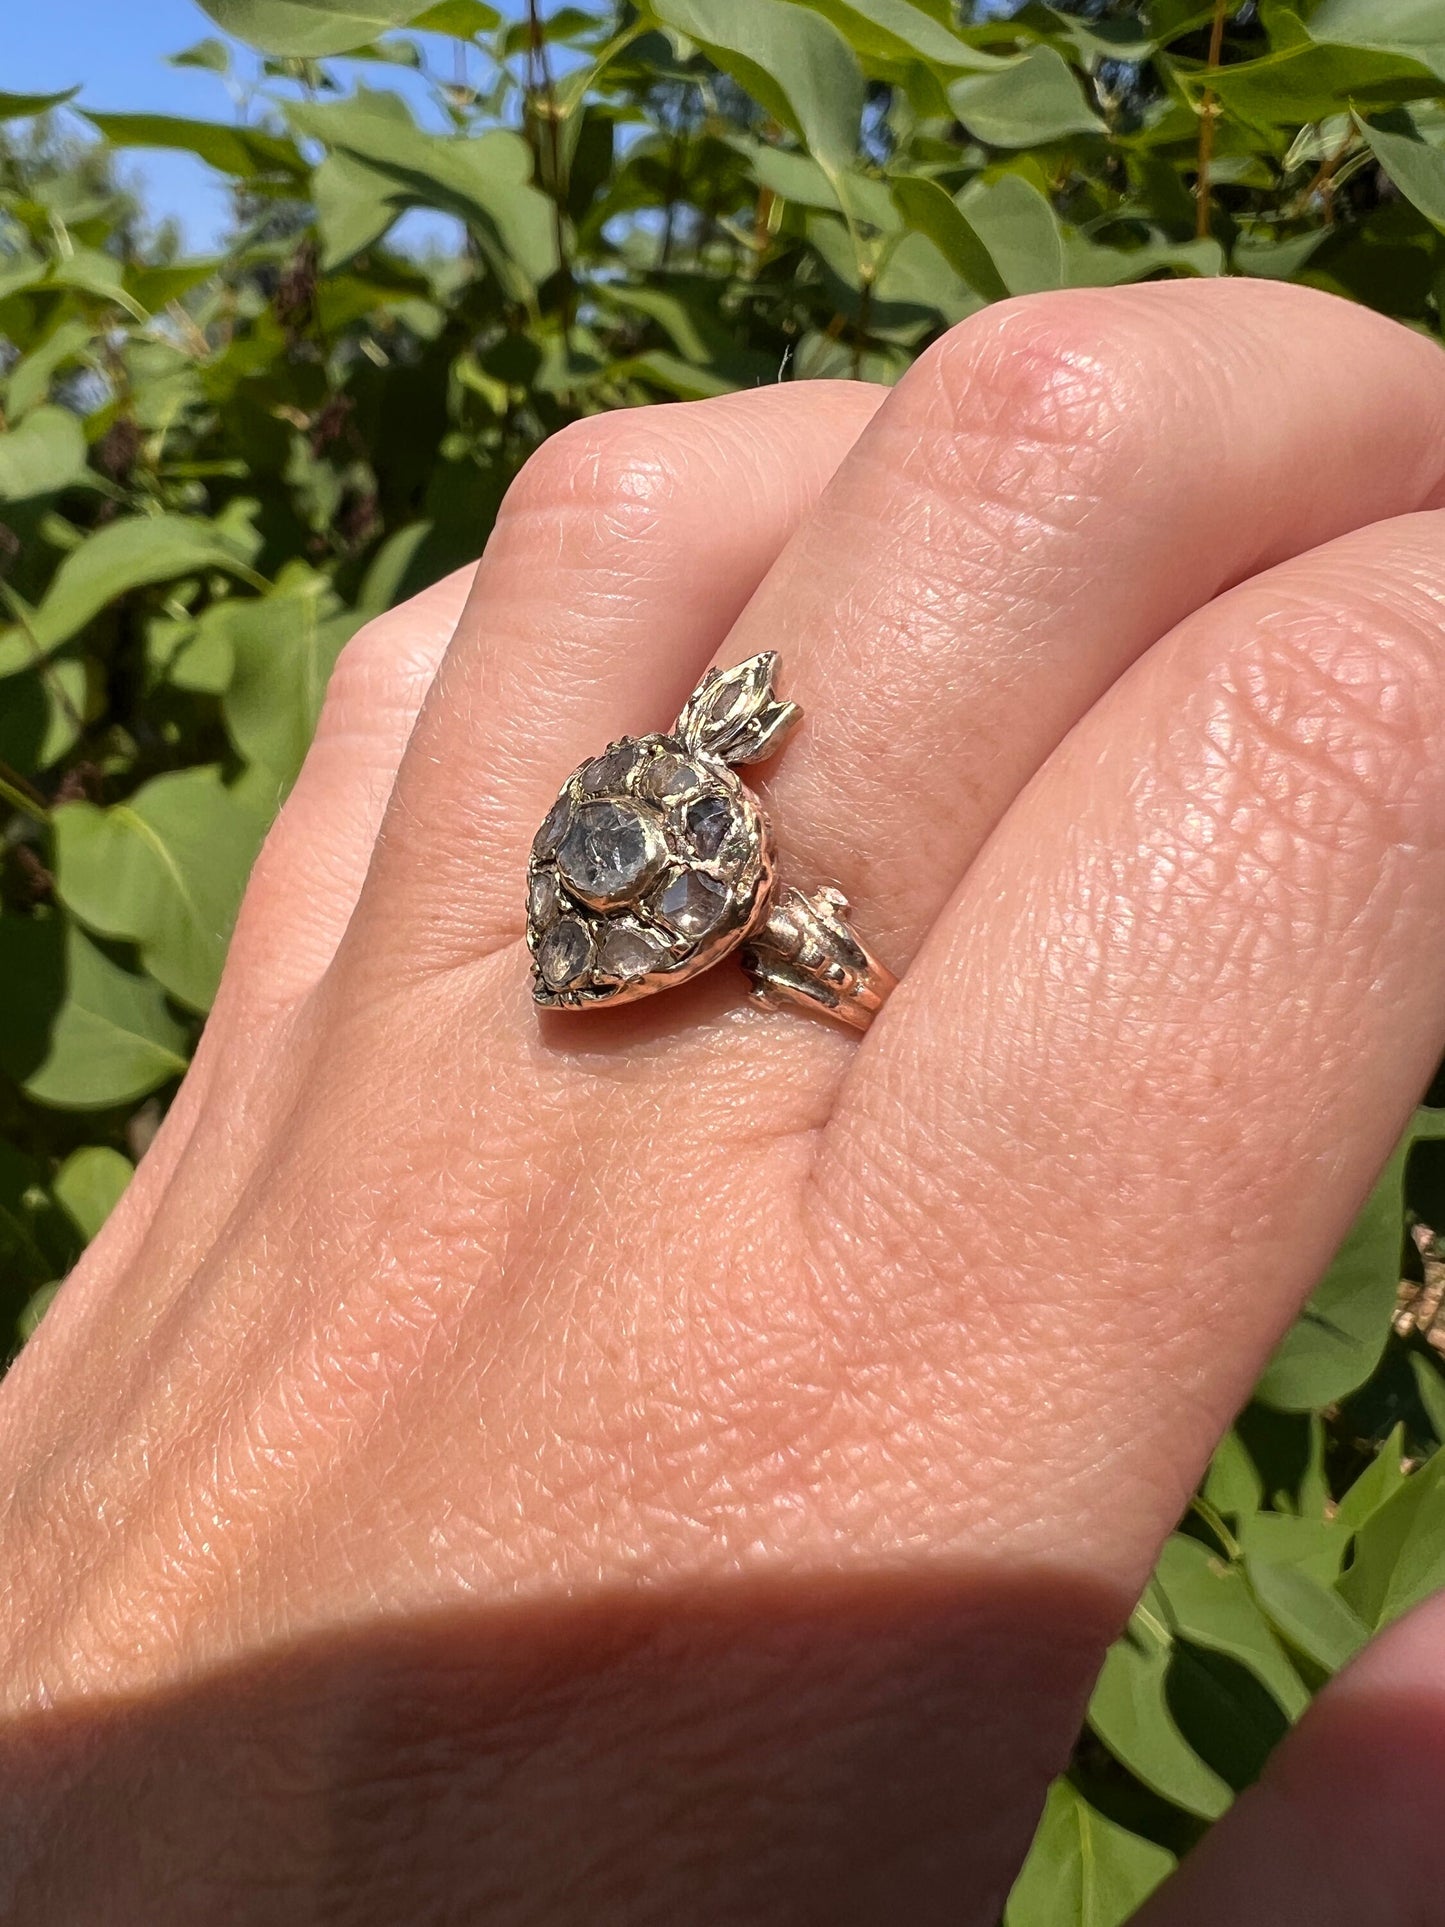 FLAMING HEART French Antique GEORGIAN Era Rose Cut Diamond 18k Gold Ring Crowned Witch's Antique Figural Victorian Moody Sparkle Love Gift